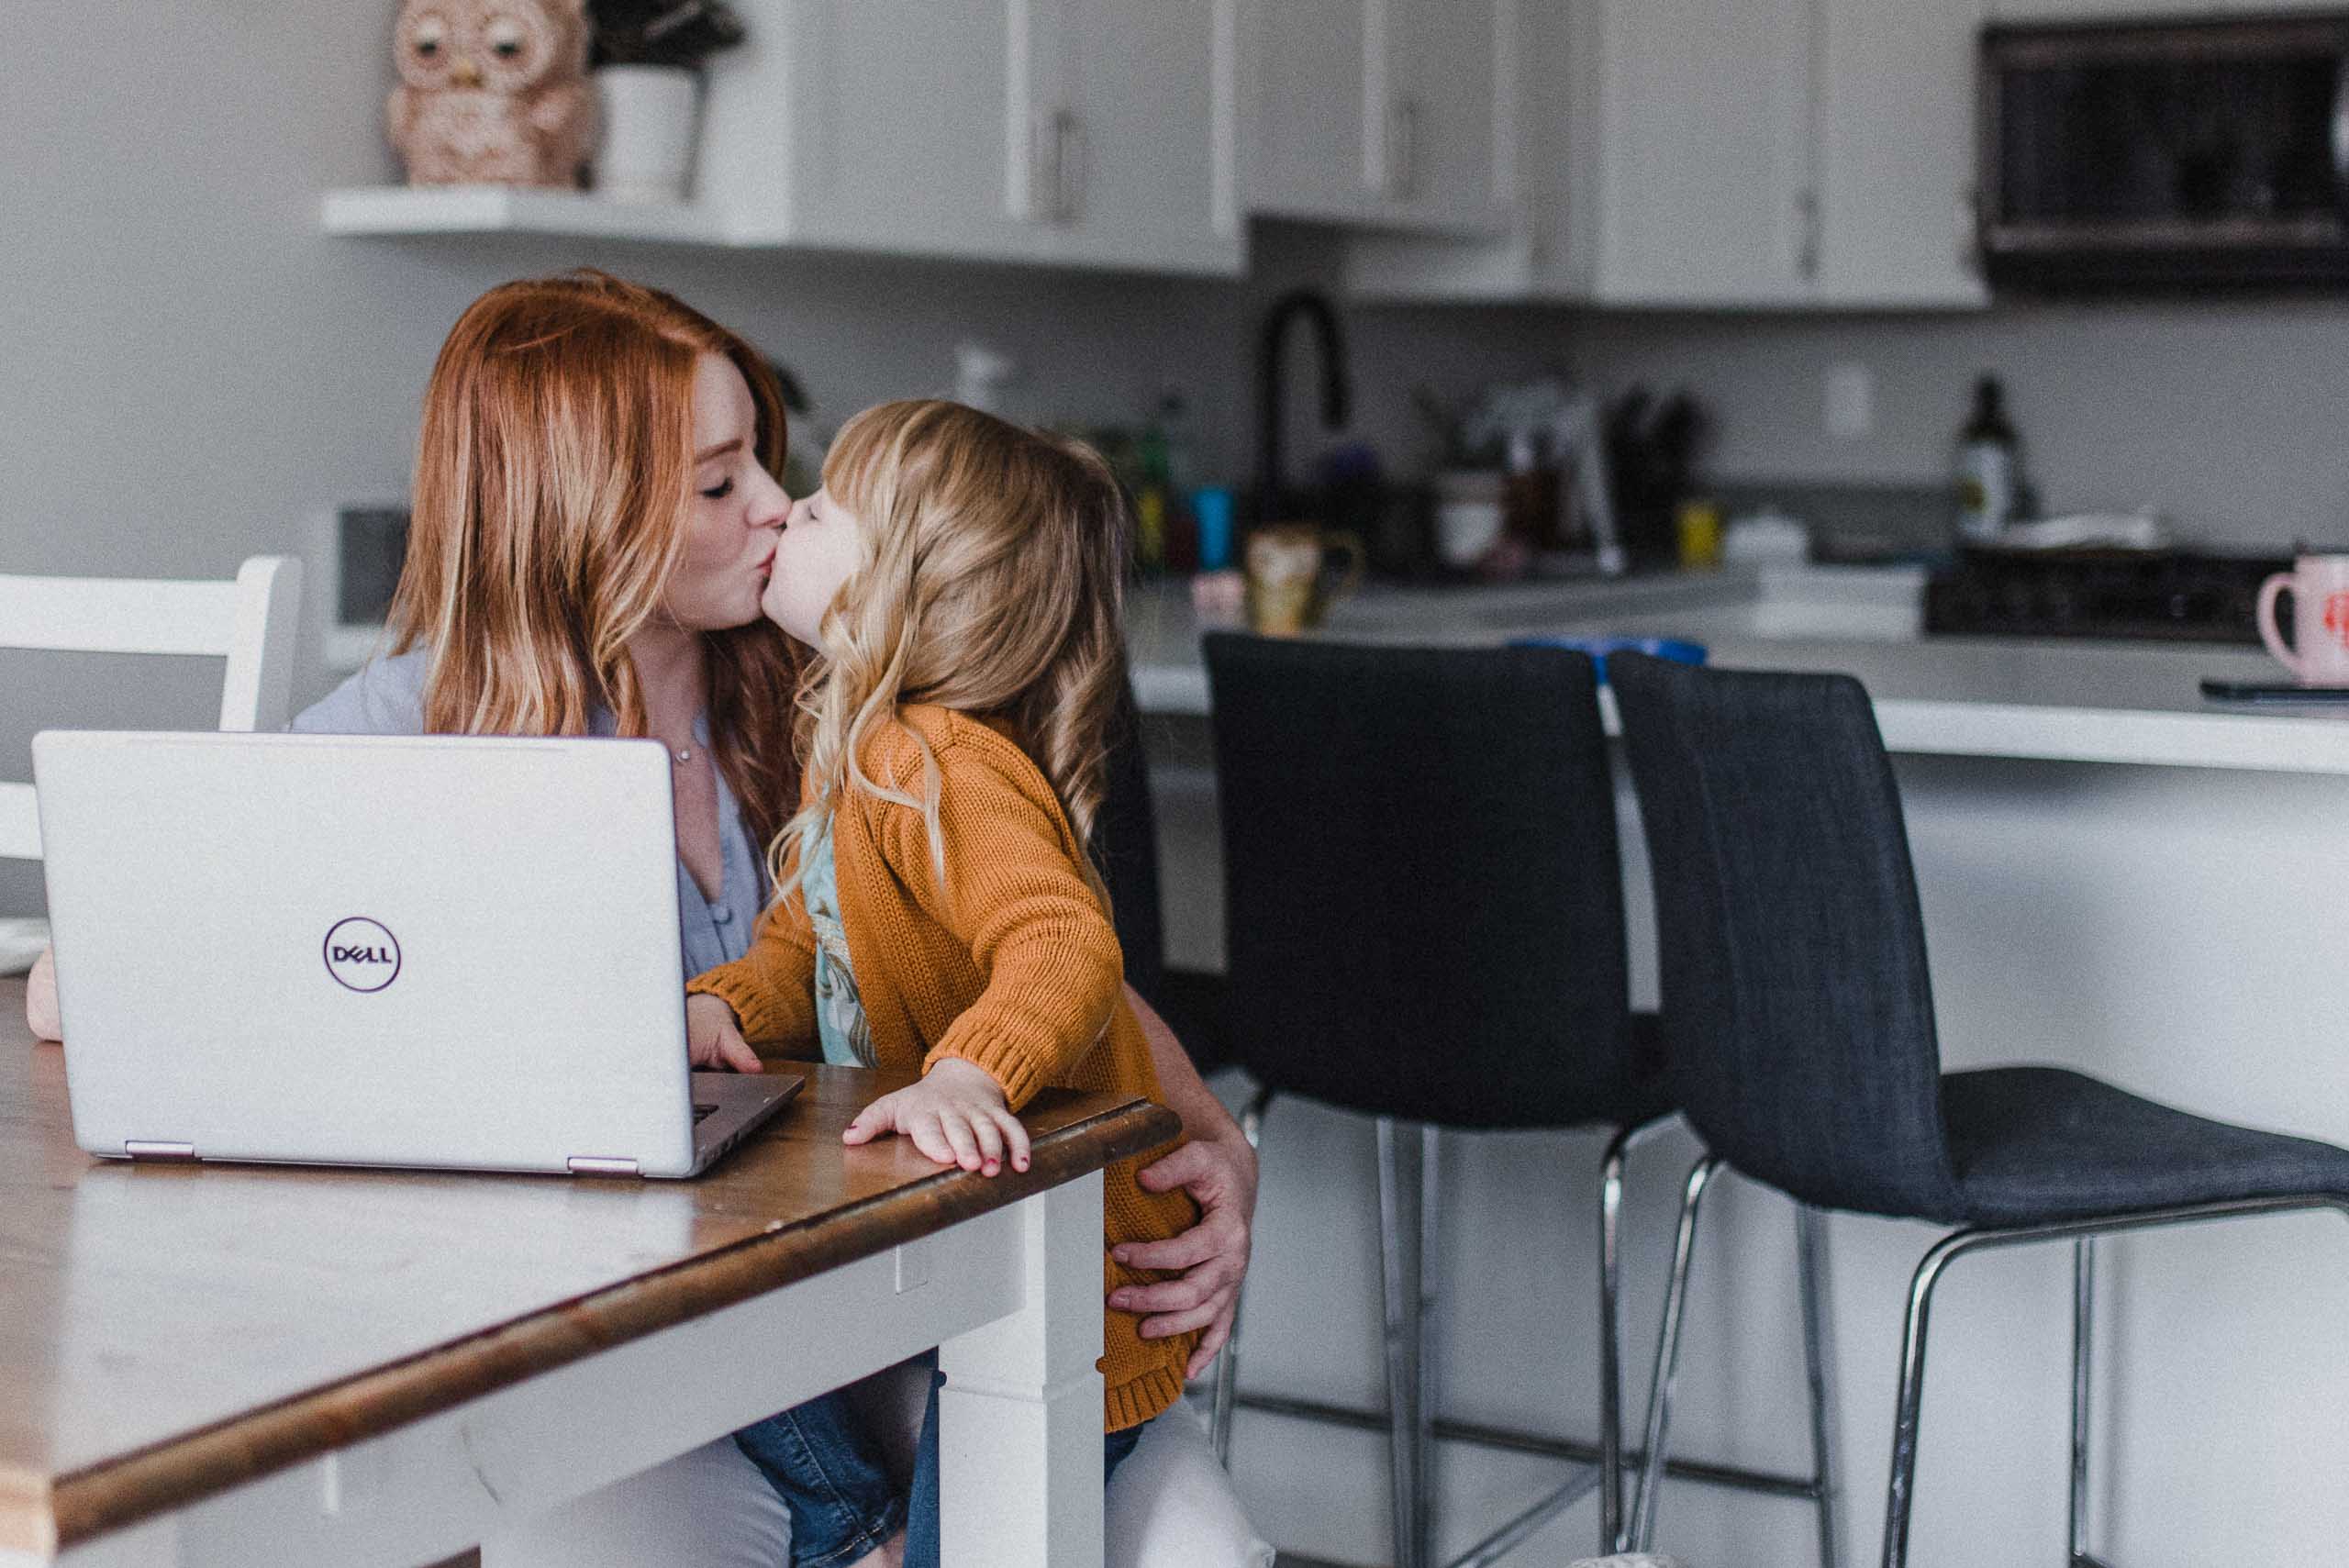 Skyleigh McCallum, a Kamloops Realtor sits at the table in her kitchen in front of her laptop and gives her little daughter a smooch while their dog sits at her feet